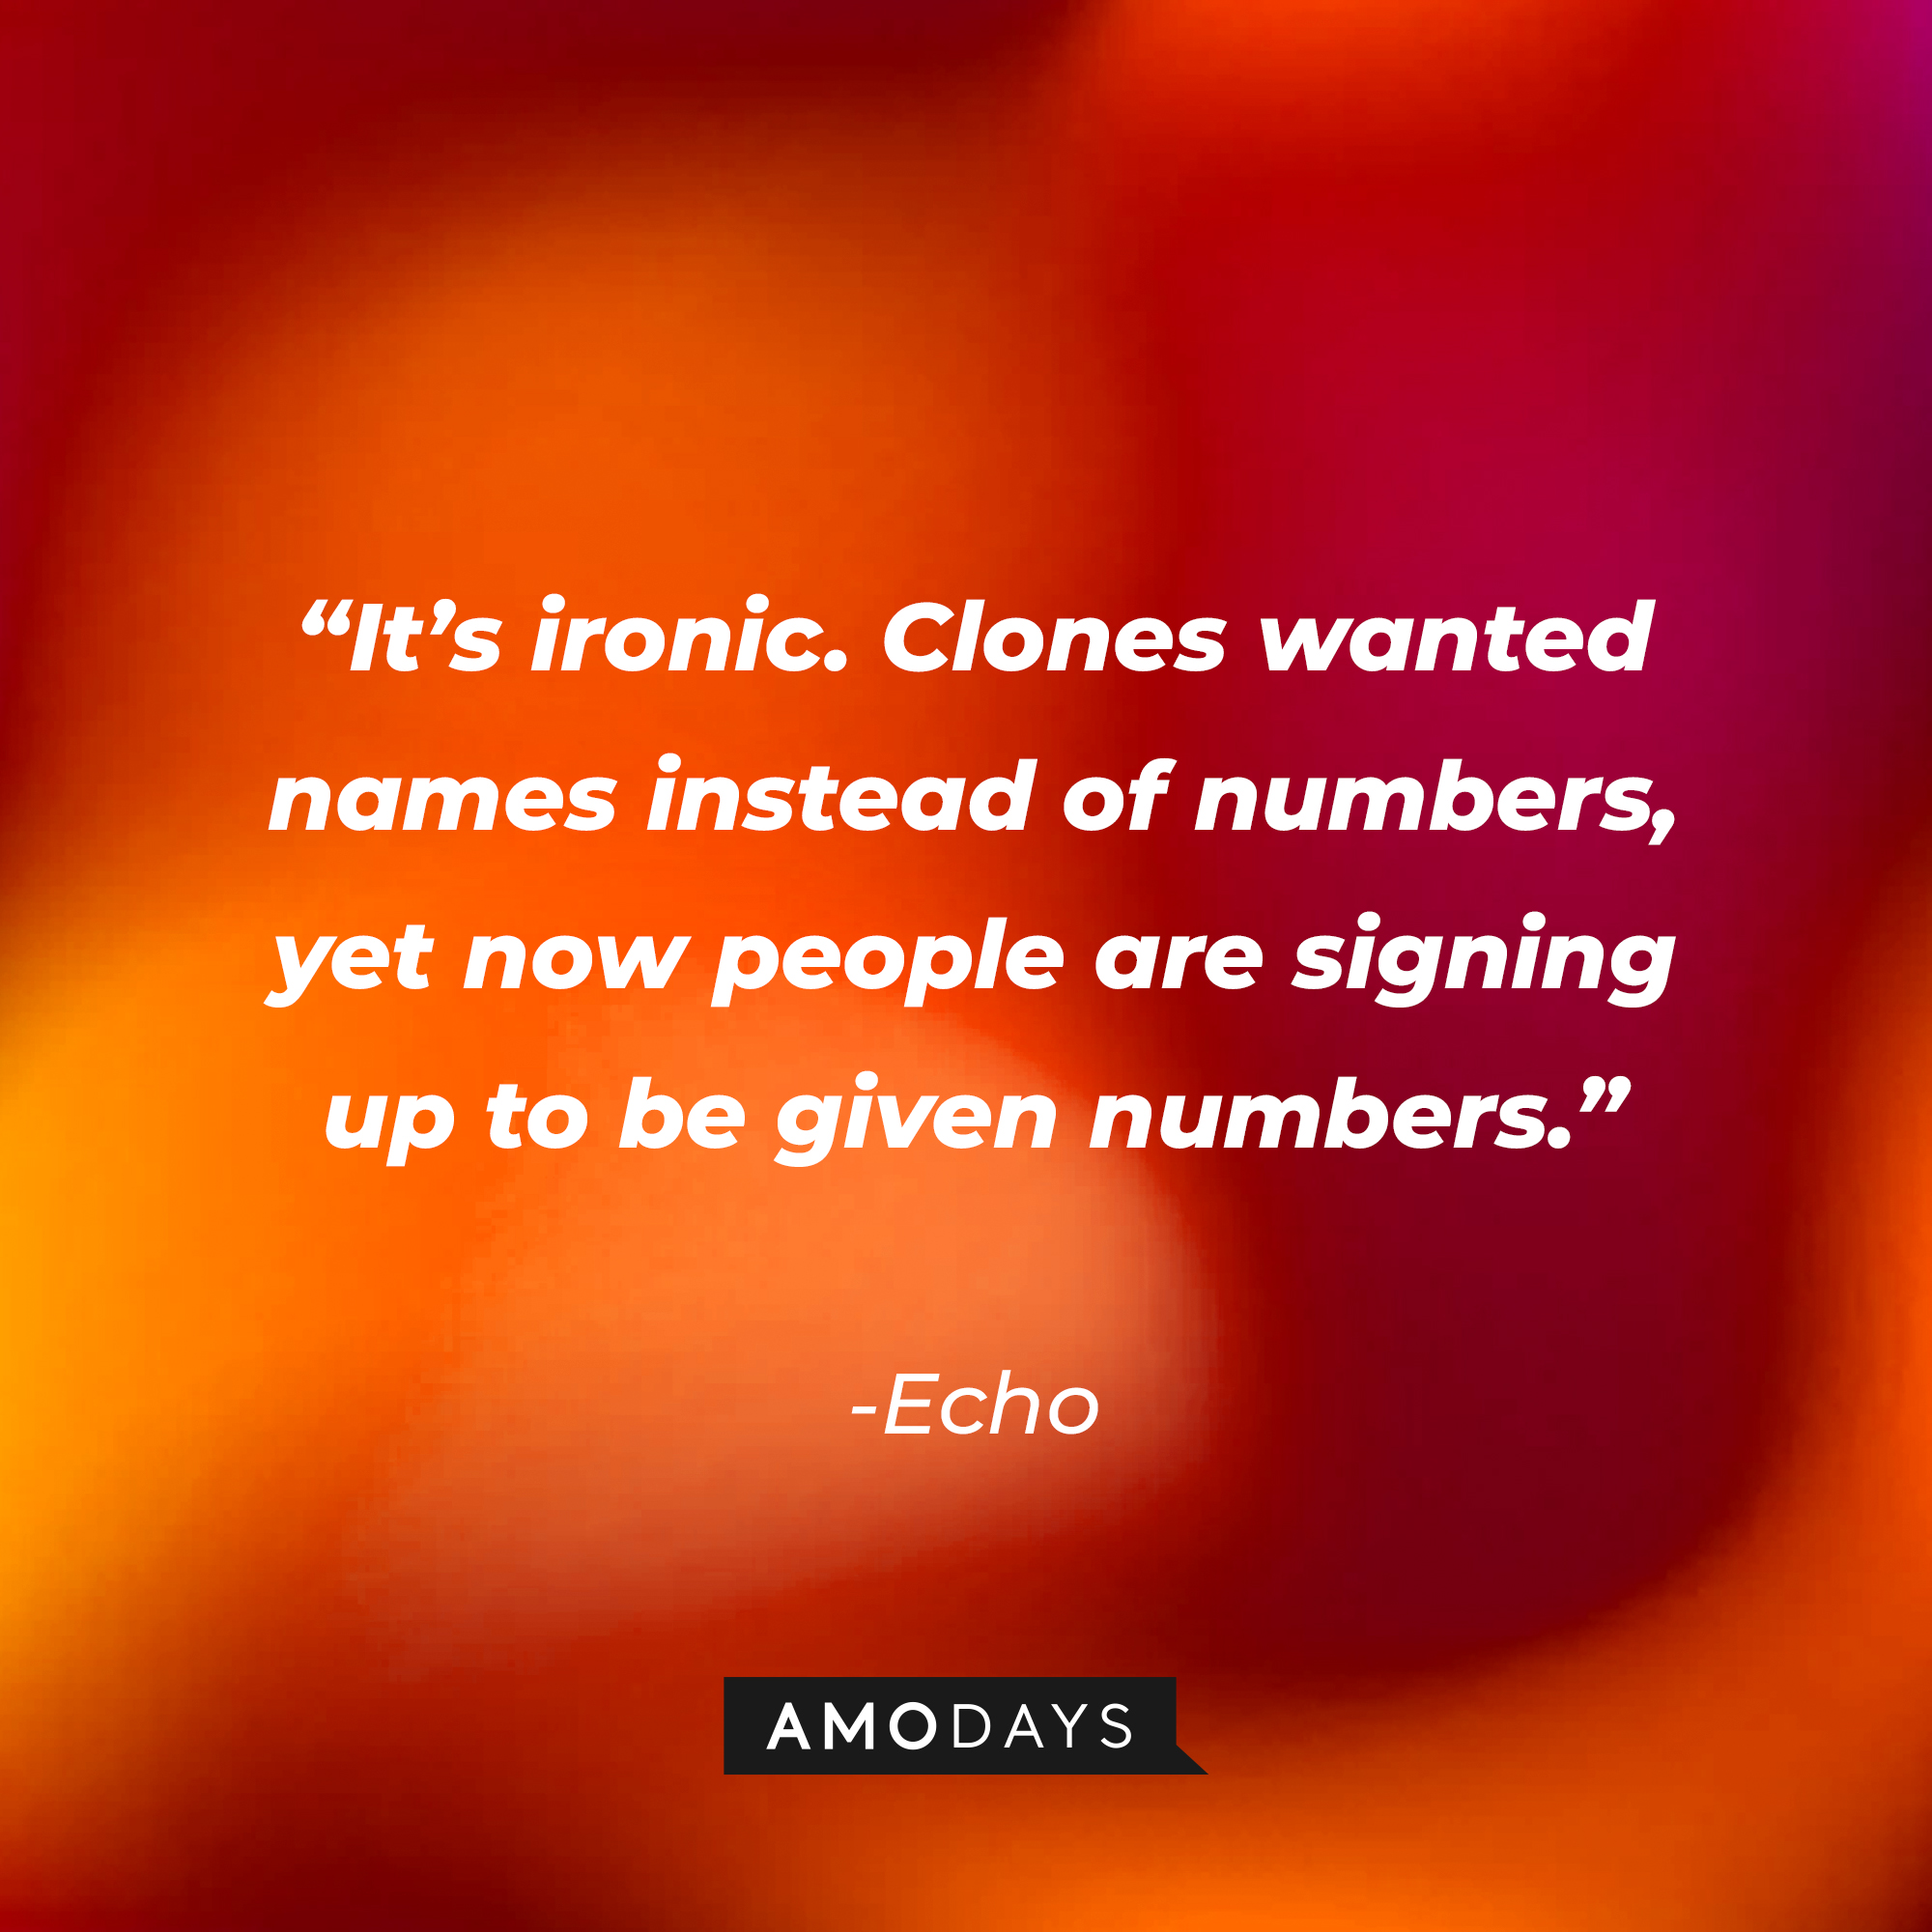 Echo’s quote: "It’s ironic. Clones wanted names instead of numbers, yet now people are signing up to be given numbers." | Source: AmoDays